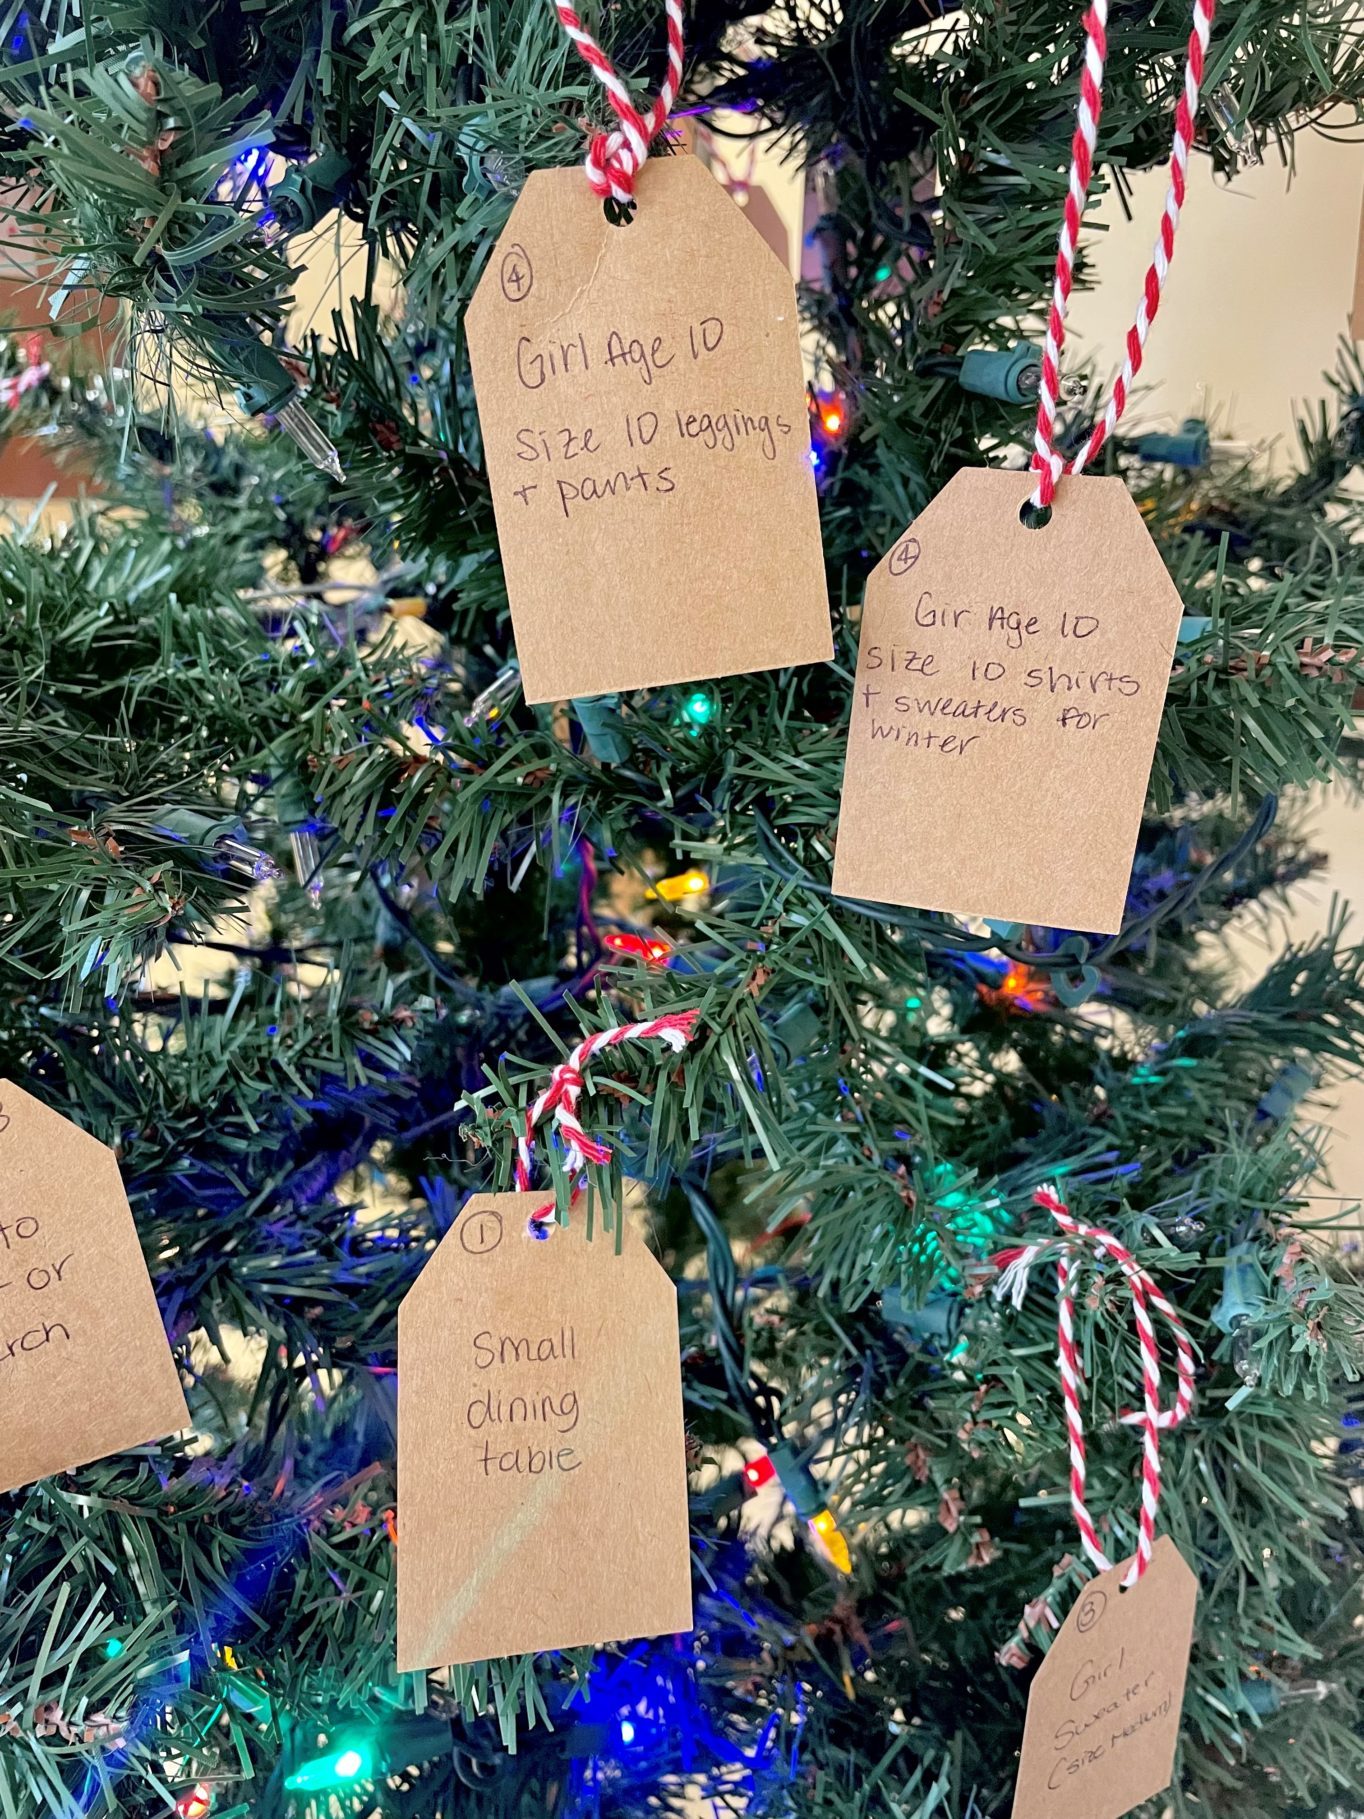 Wish list tag ornaments hanging on holiday tree.